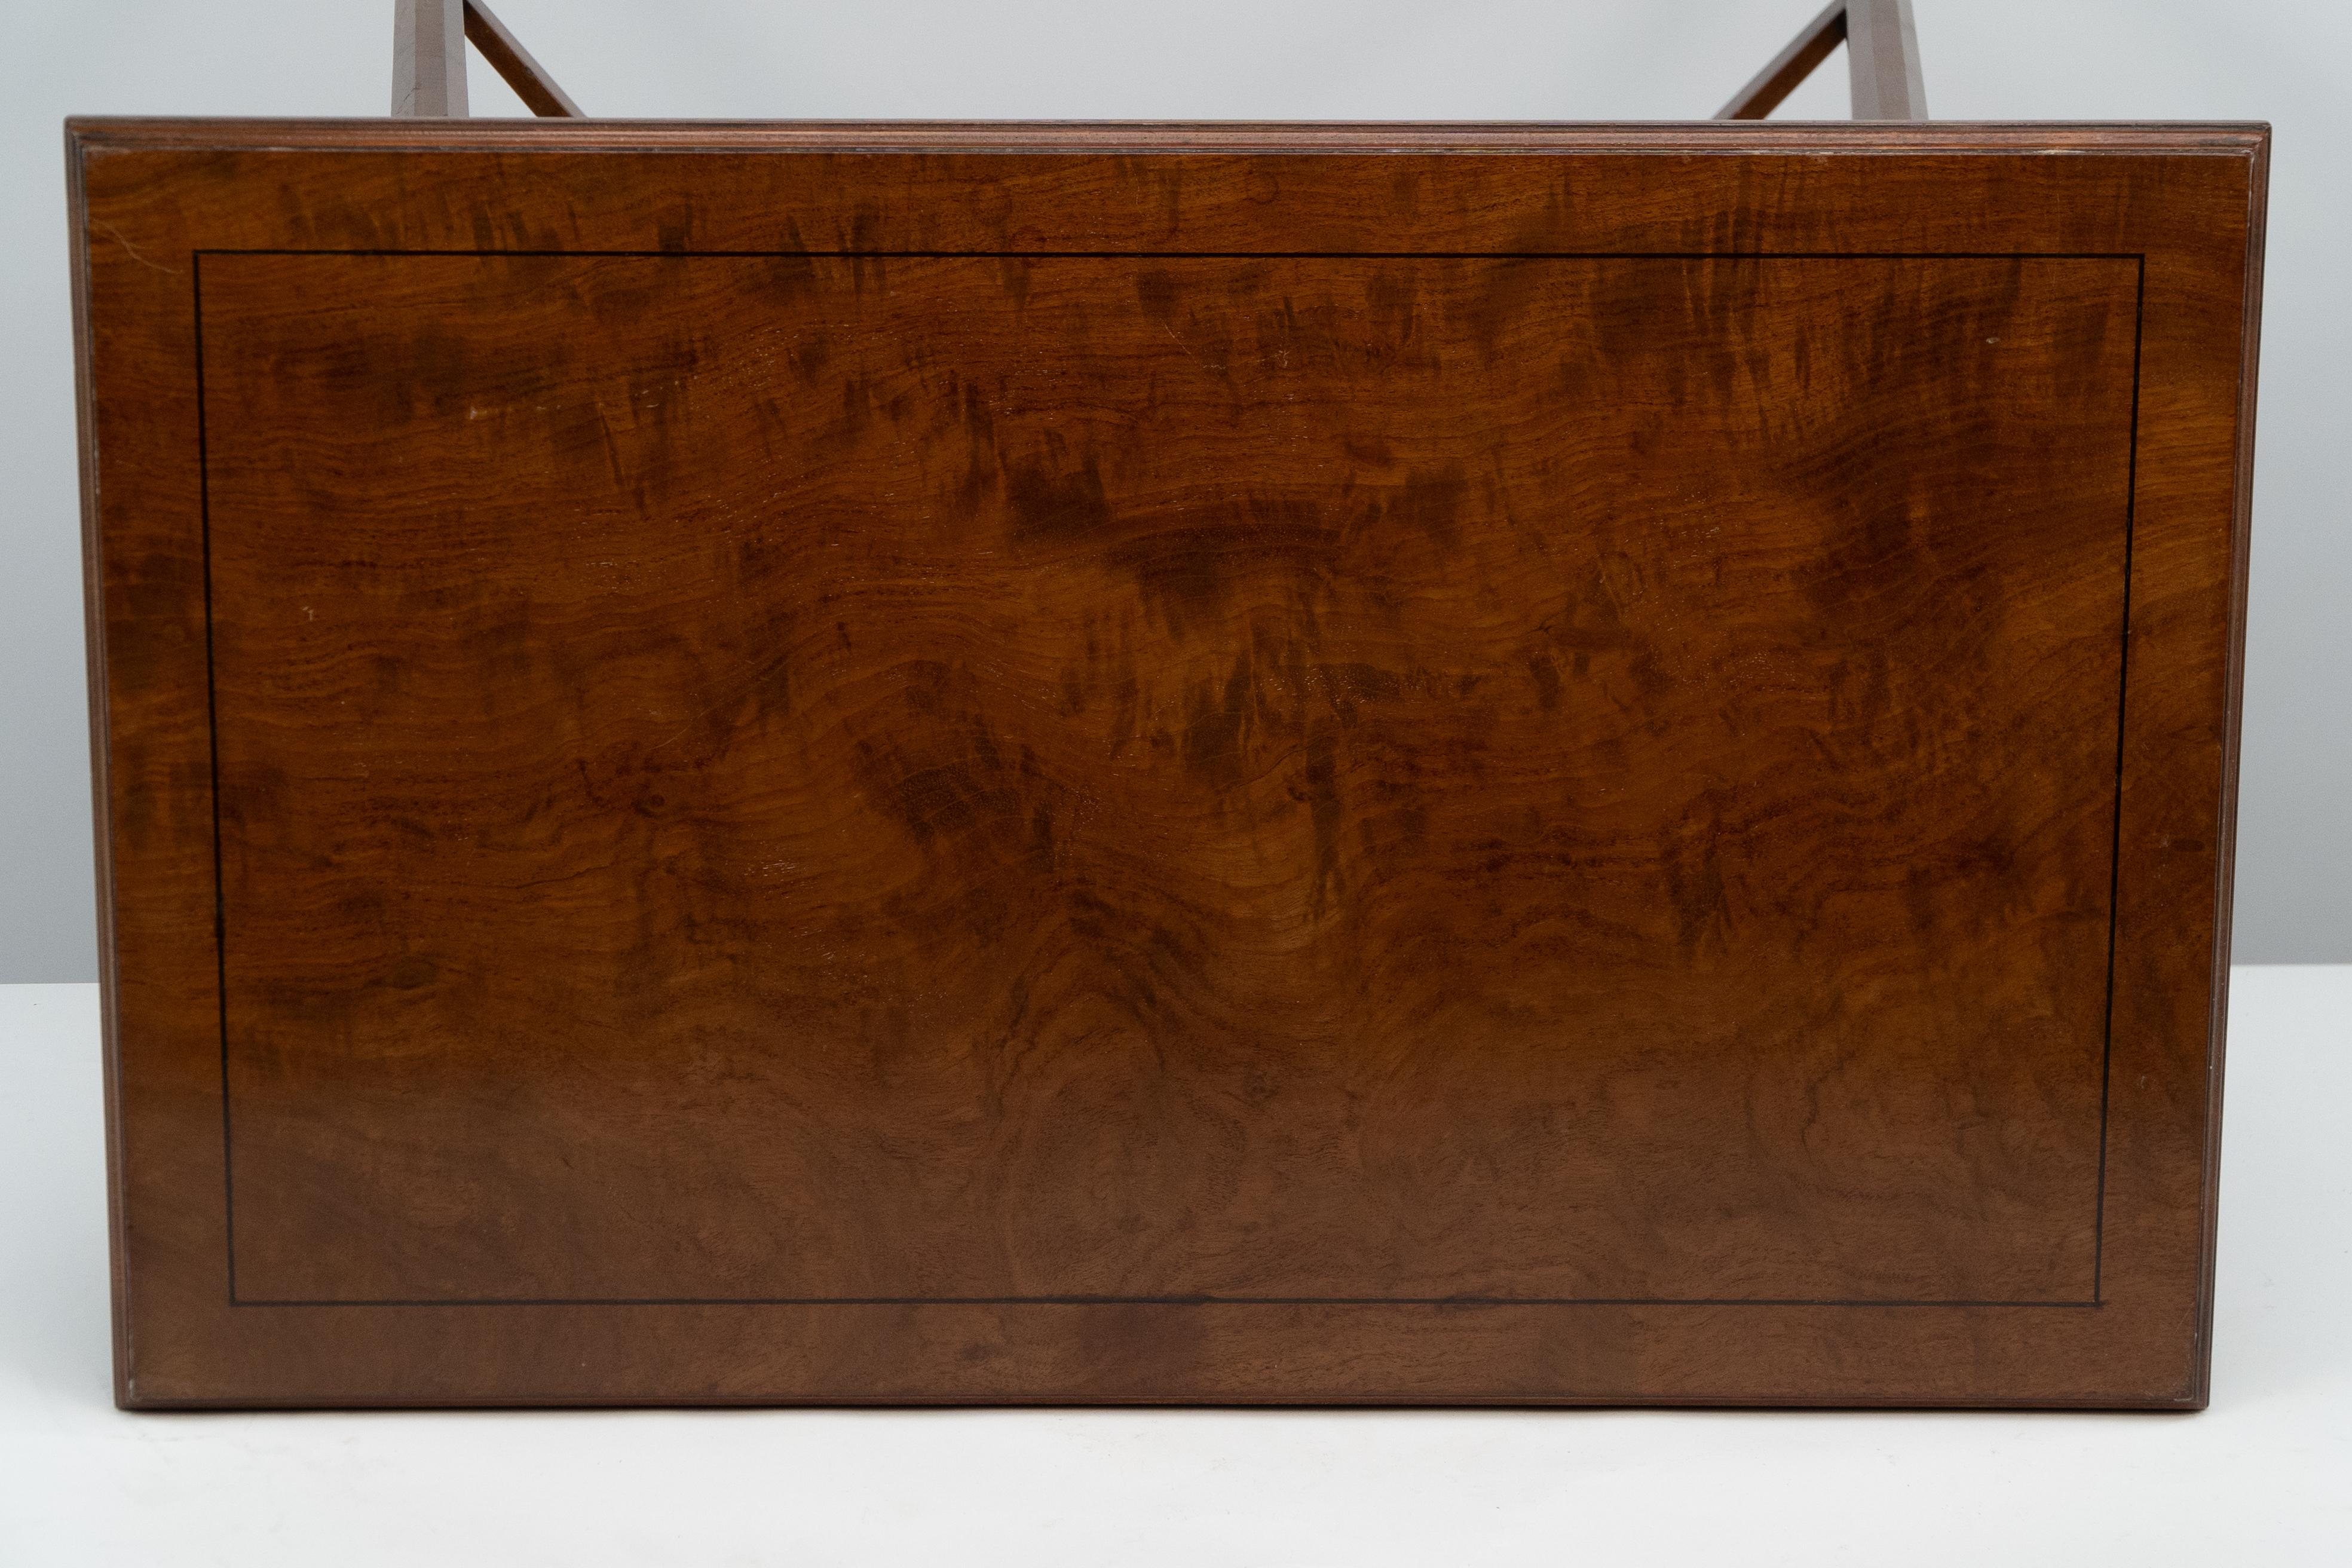 Late 19th Century Morris & Co. A fine quality Aesthetic Movement walnut side table. For Sale